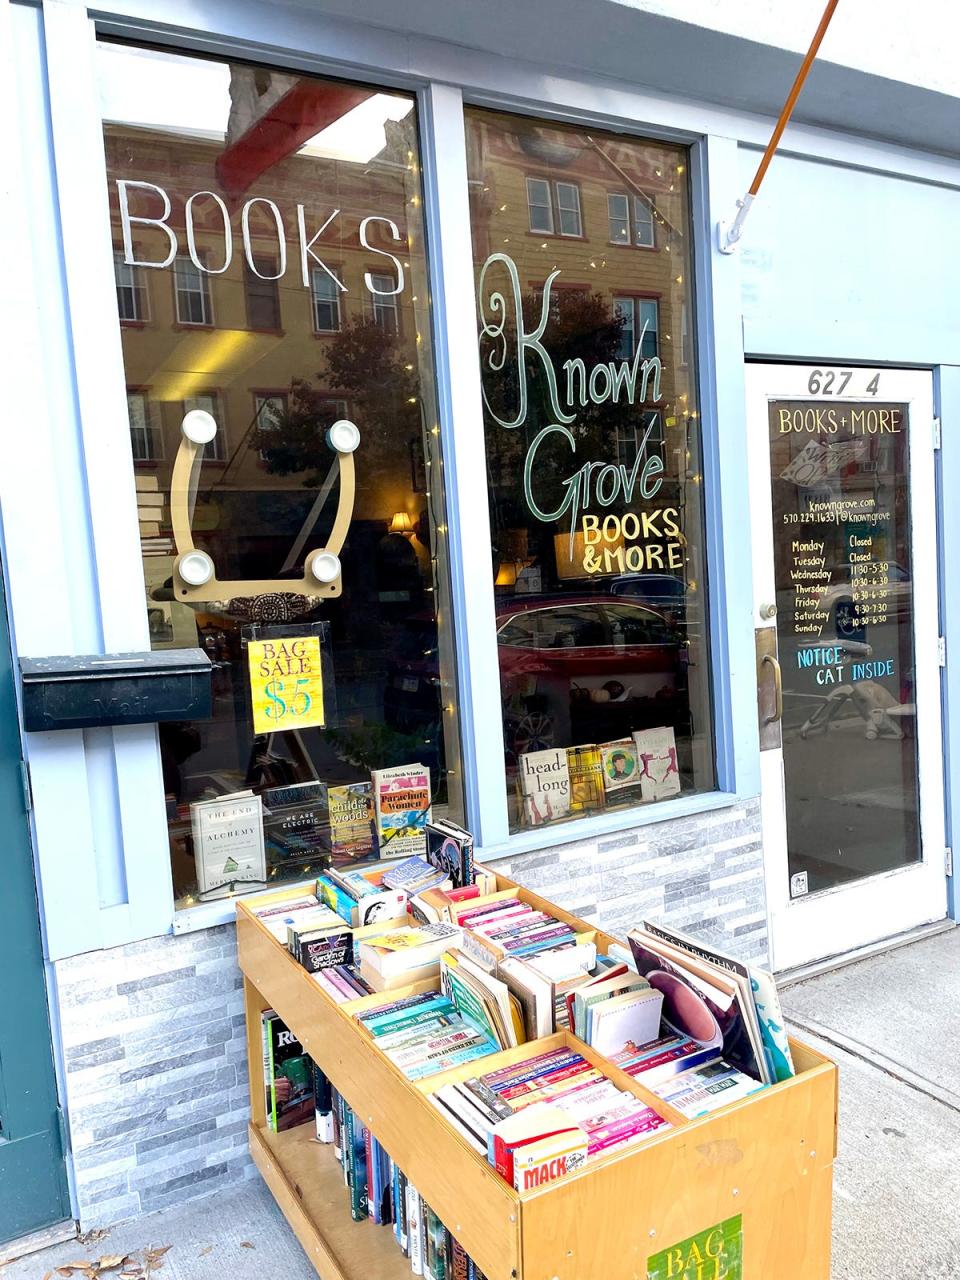 Goblin and Gnome's Known Grove Books & More recently celebrated its first anniversary at 627-4 Main Street in Honesdale.